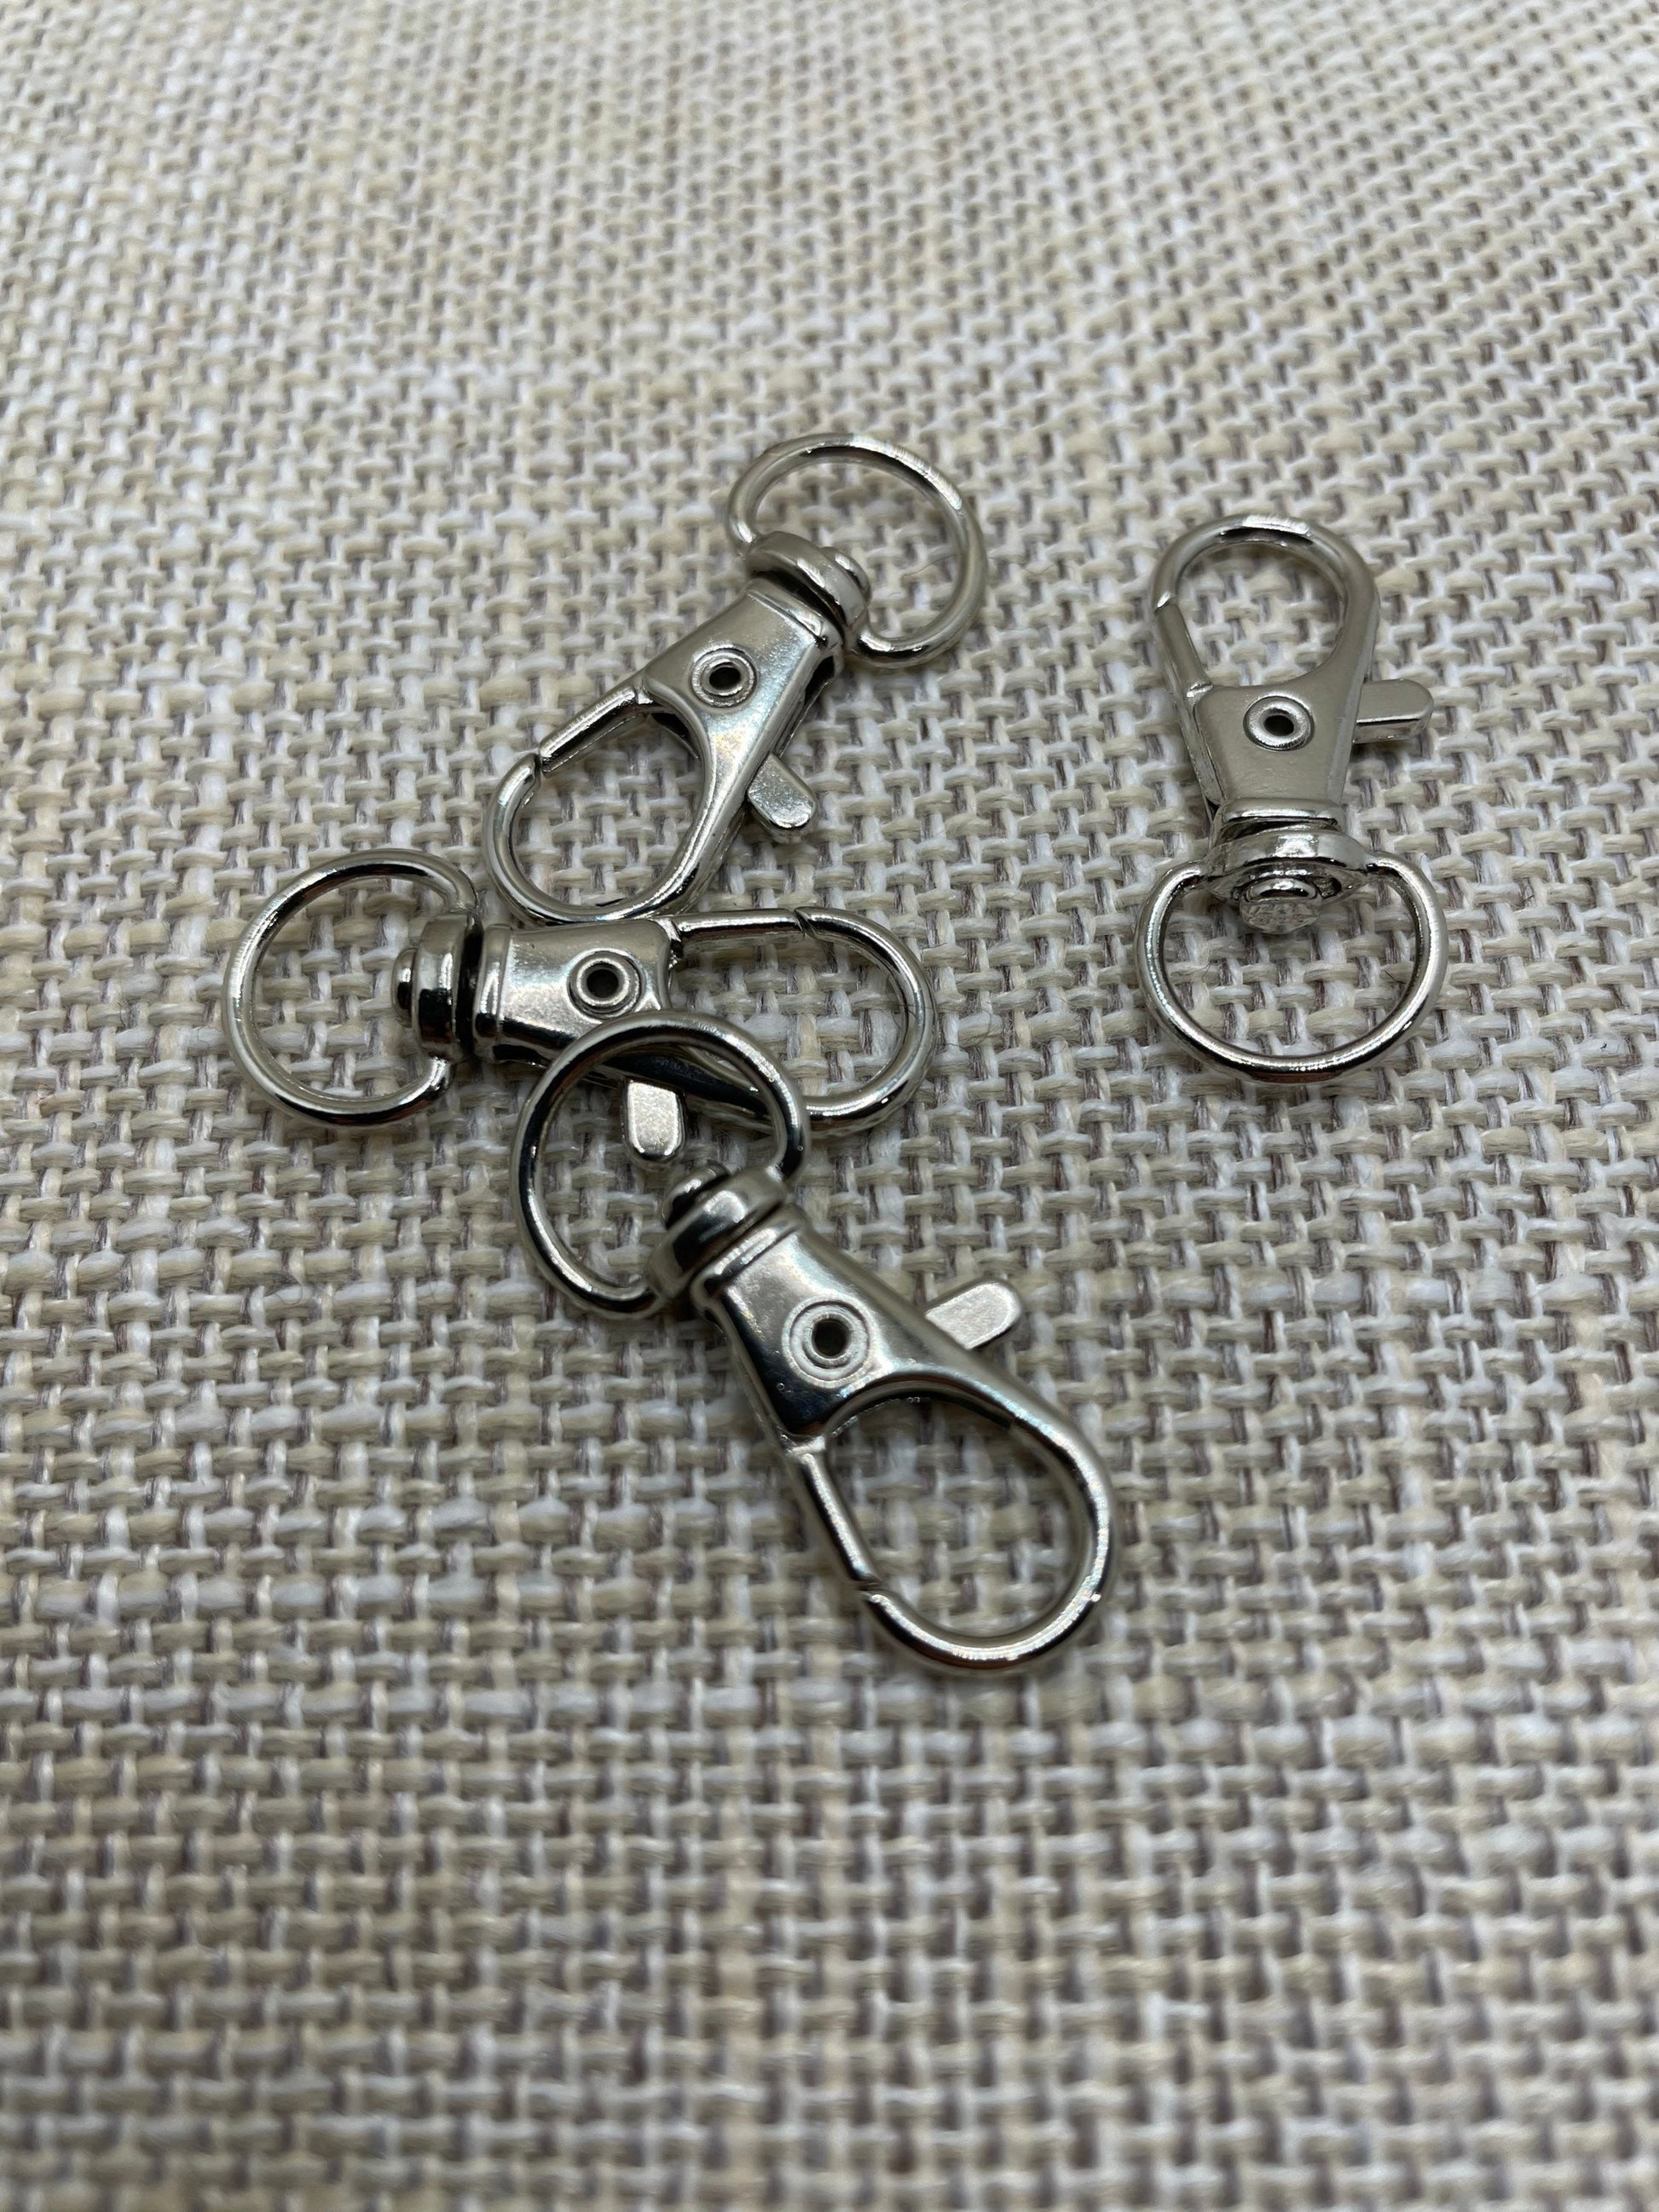 Swivel loop Clip, Upclose of set of 4 Clips, Tassel Clips, Tzit Tzit Clip Metallic Silver painted